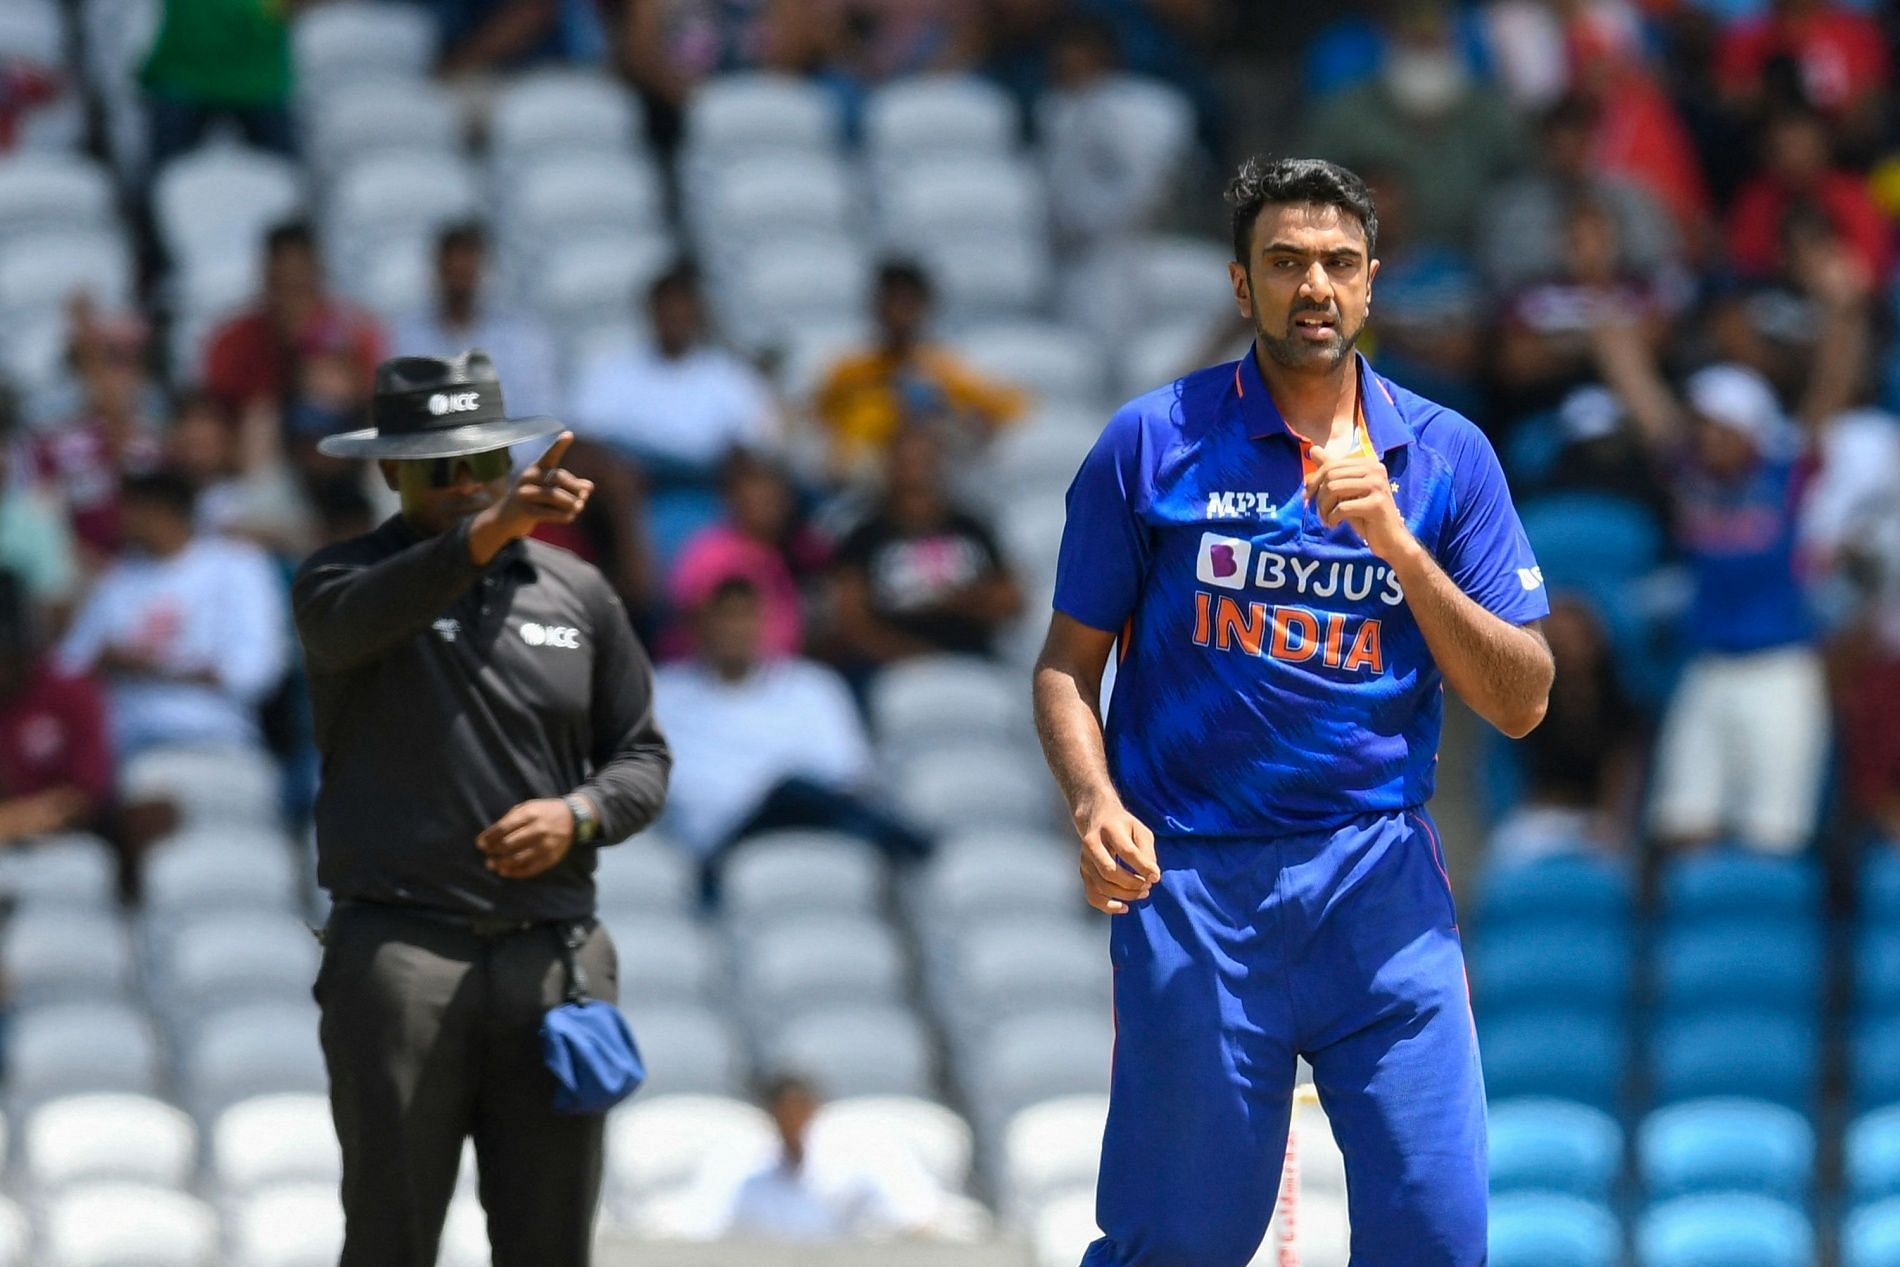 Ravichandran Ashwin claimed 2 for 22 in the 1st T20I against West Indies. Pic: BCCI